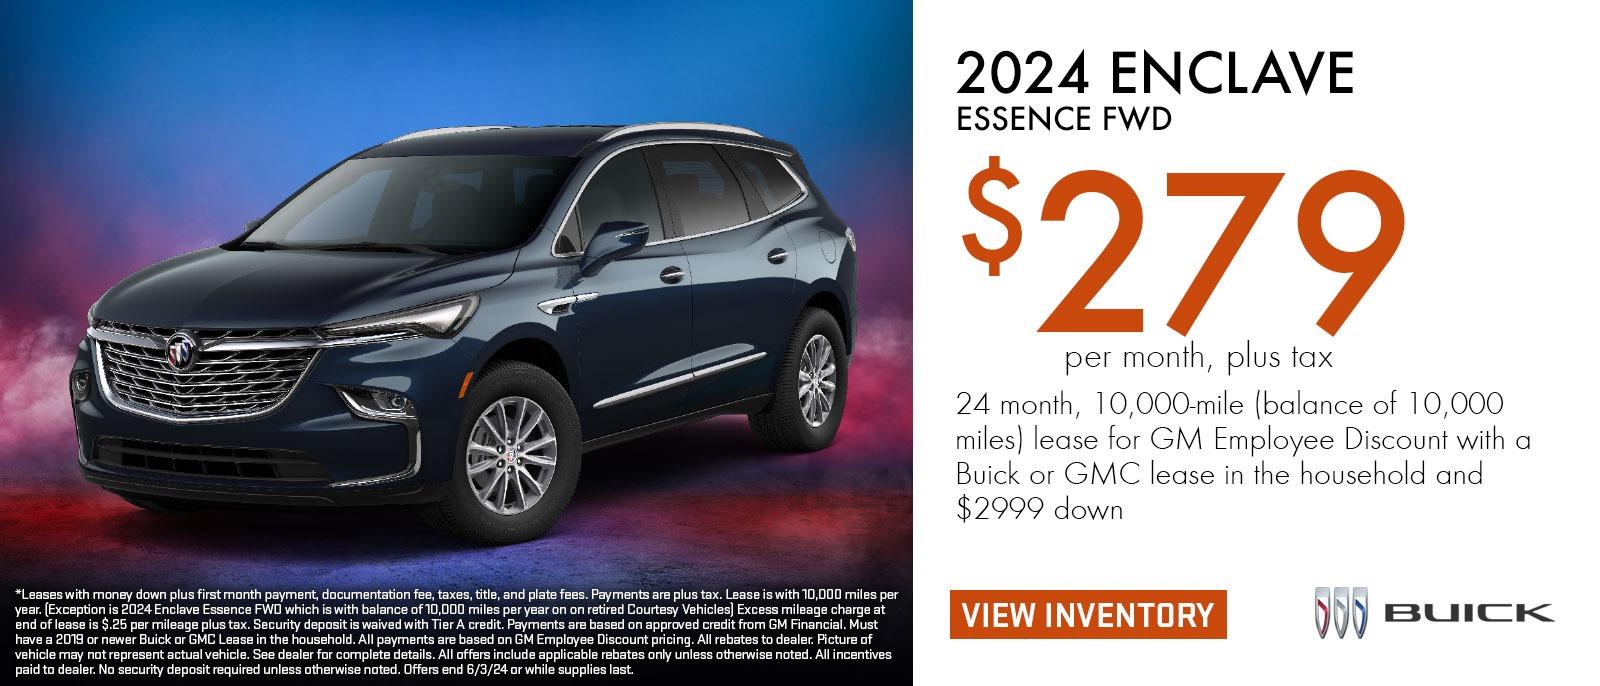 2024 Enclave
$279 per month, plus tax
24 months, 10,000-mile lease for GM Employee Discount with a Buick or GMC lease in the household and $2999 down